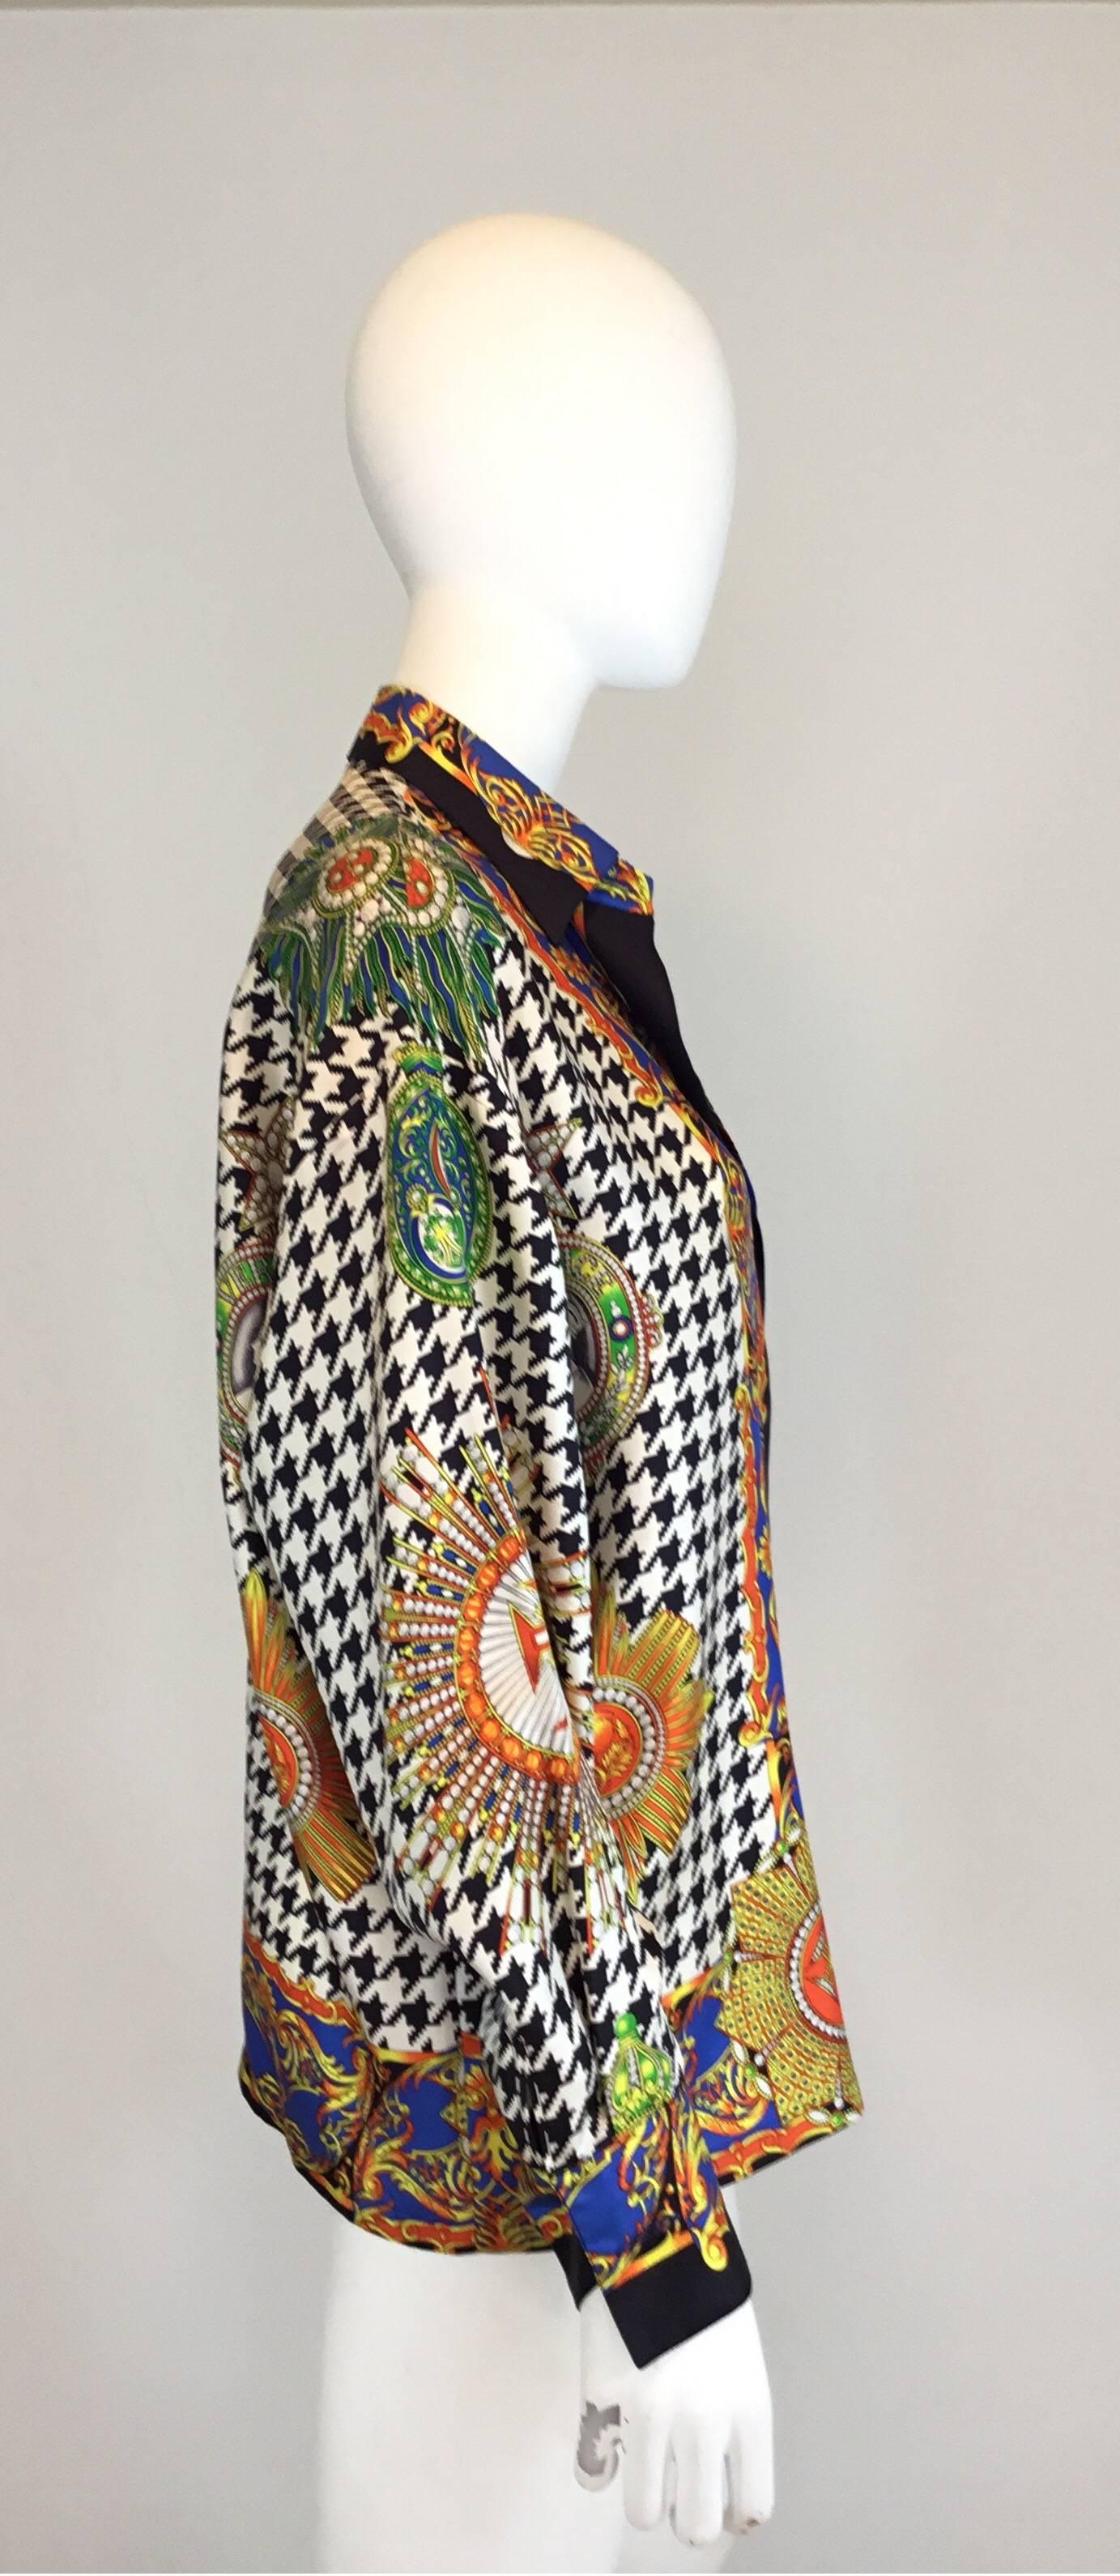 Vintage Versace blouse made of 100% silk features a vibrant and sharp print throughout with button closures along the front and on the cuffs. Bold graphic print. Boxy slouchy oversized fit. Miami era lifetime Versace. Made in Italy.

bust-